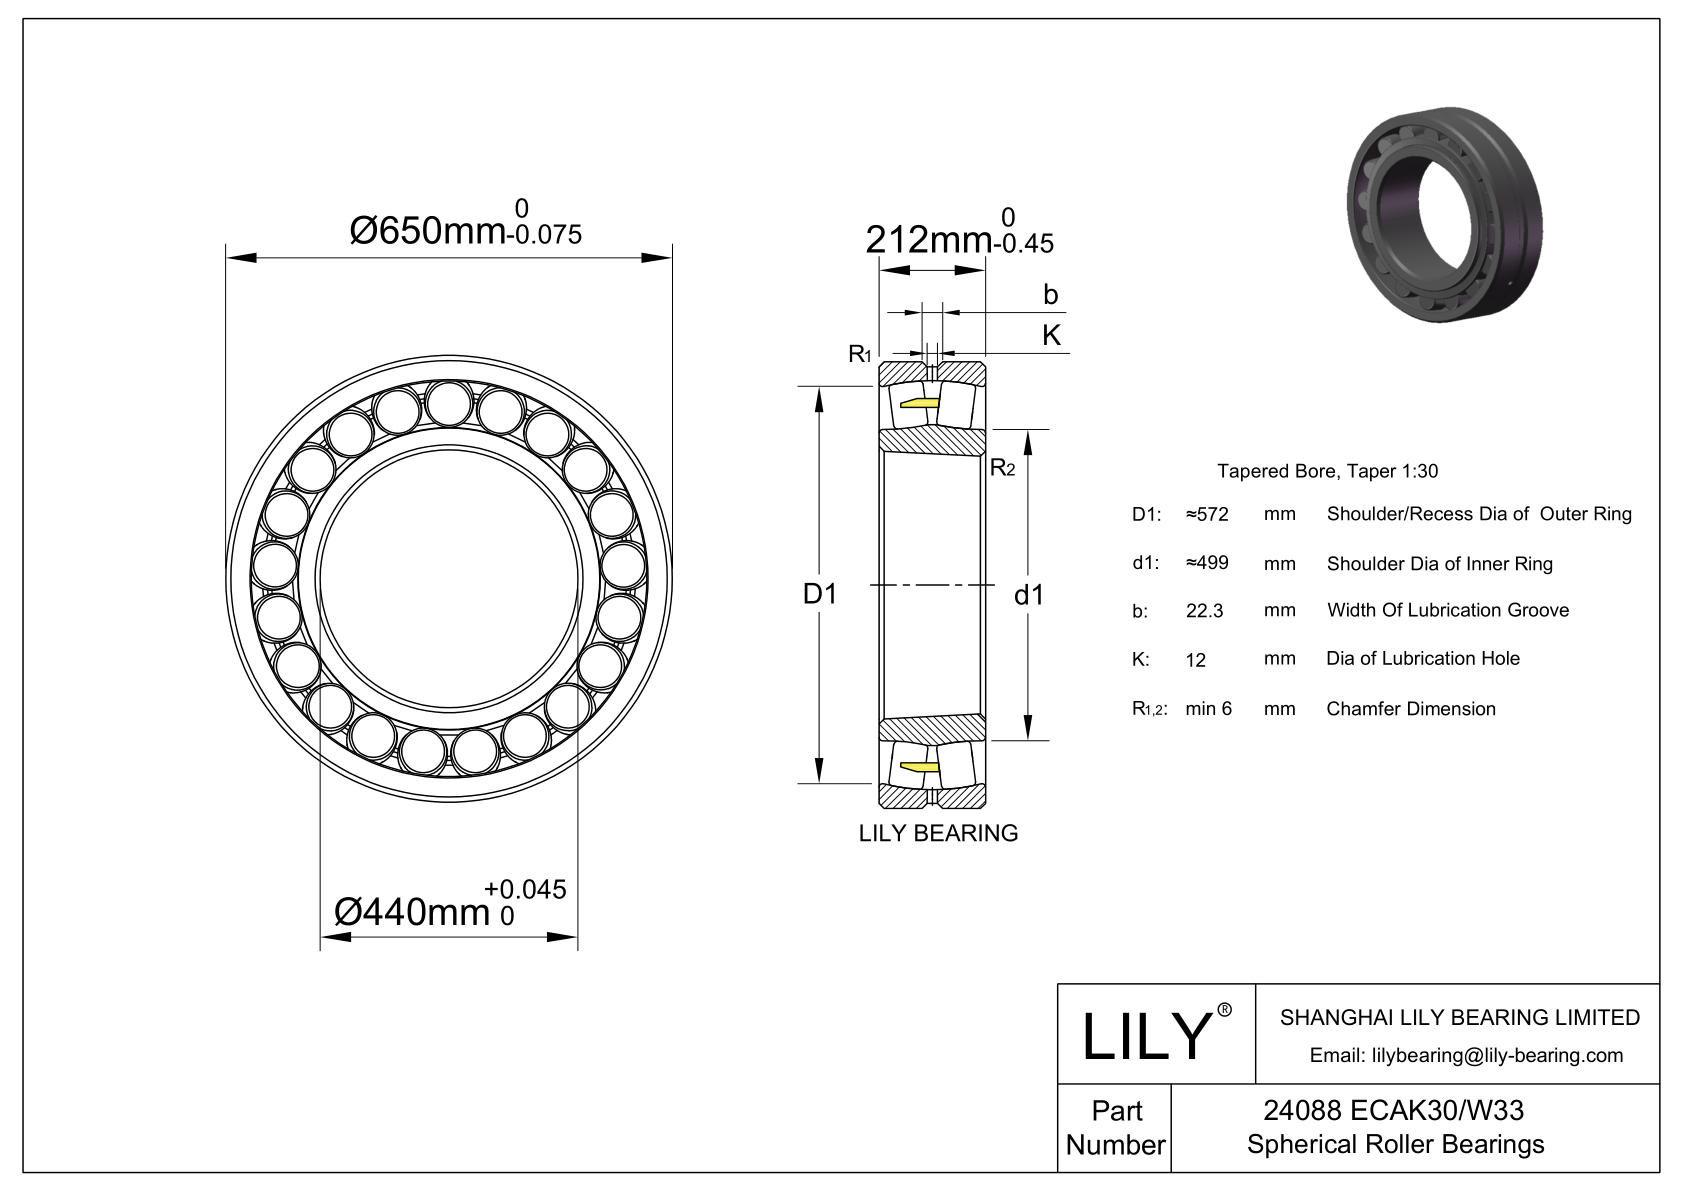 24088 ECAK30/W33 Double Row Spherical Roller Bearing cad drawing